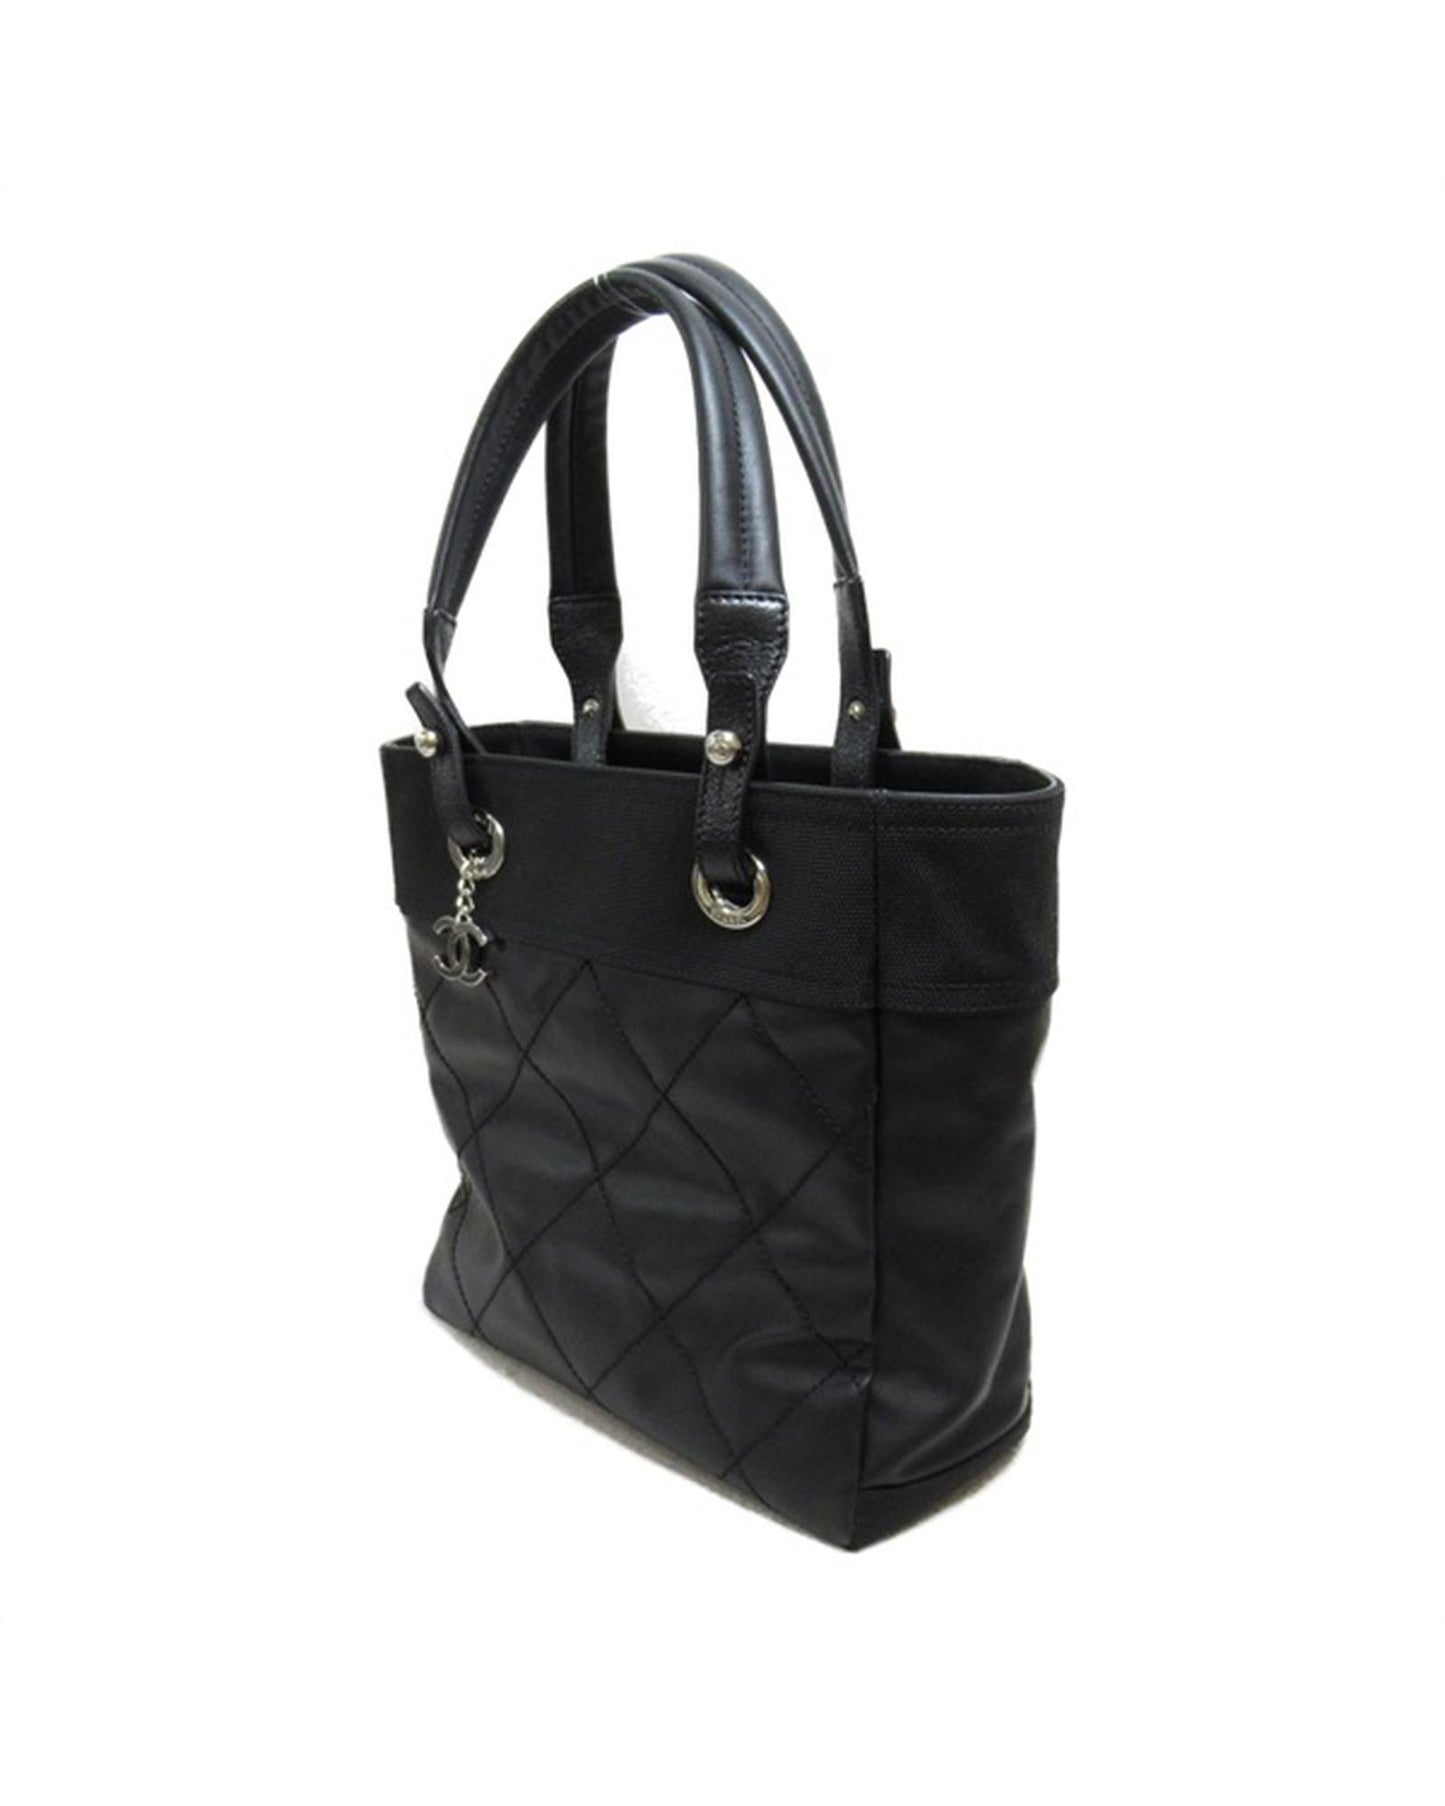 Chanel Women's Excellent Condition Luxury Tote Bag in Black